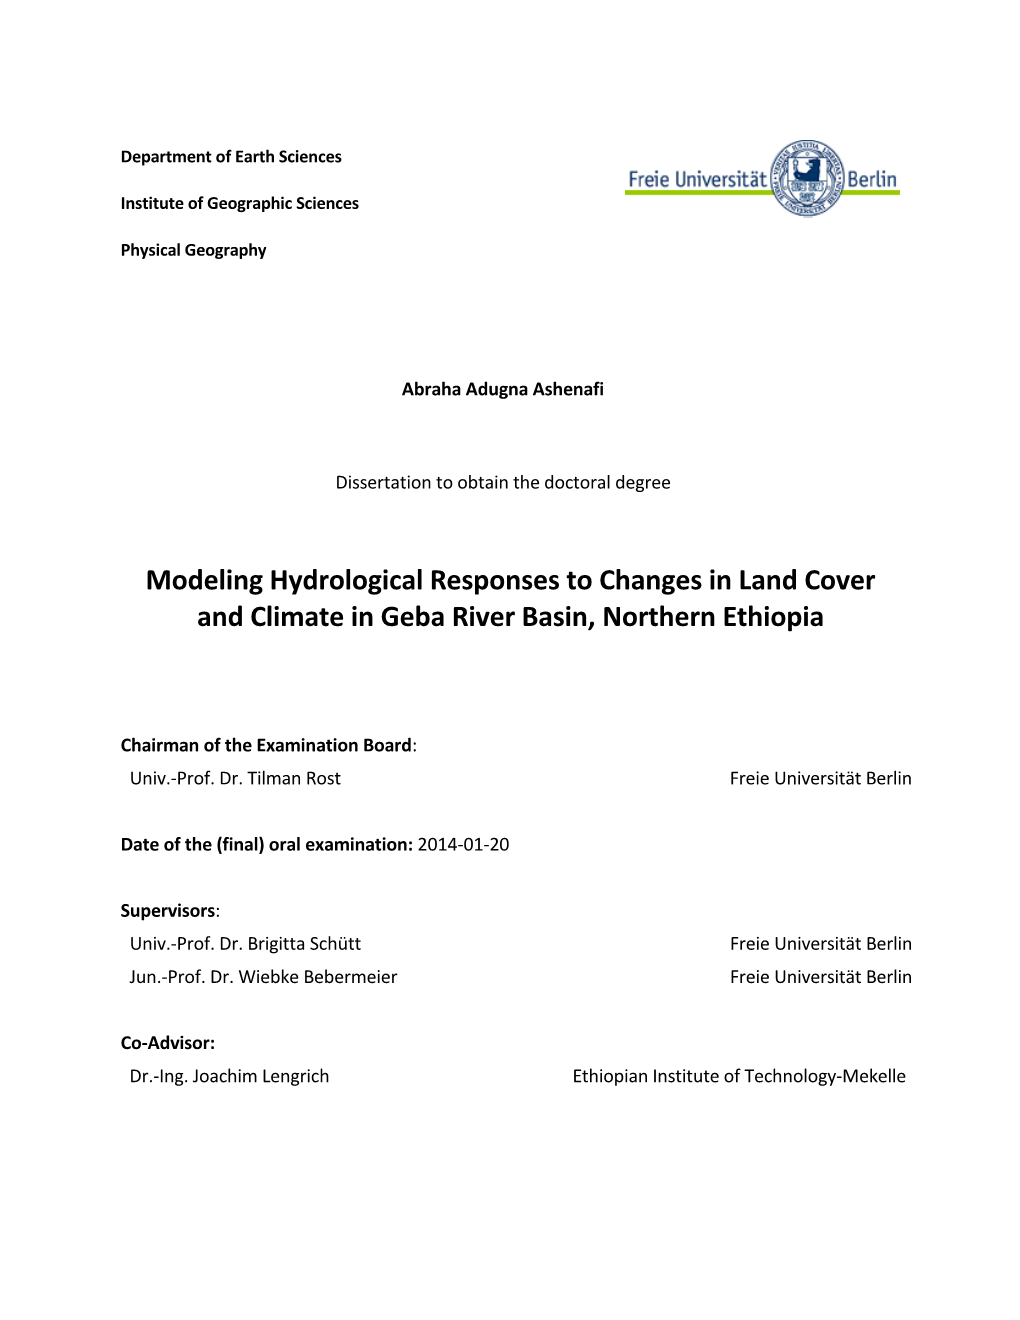 Modeling Hydrological Responses to Changes in Land Cover and Climate in Geba River Basin, Northern Ethiopia